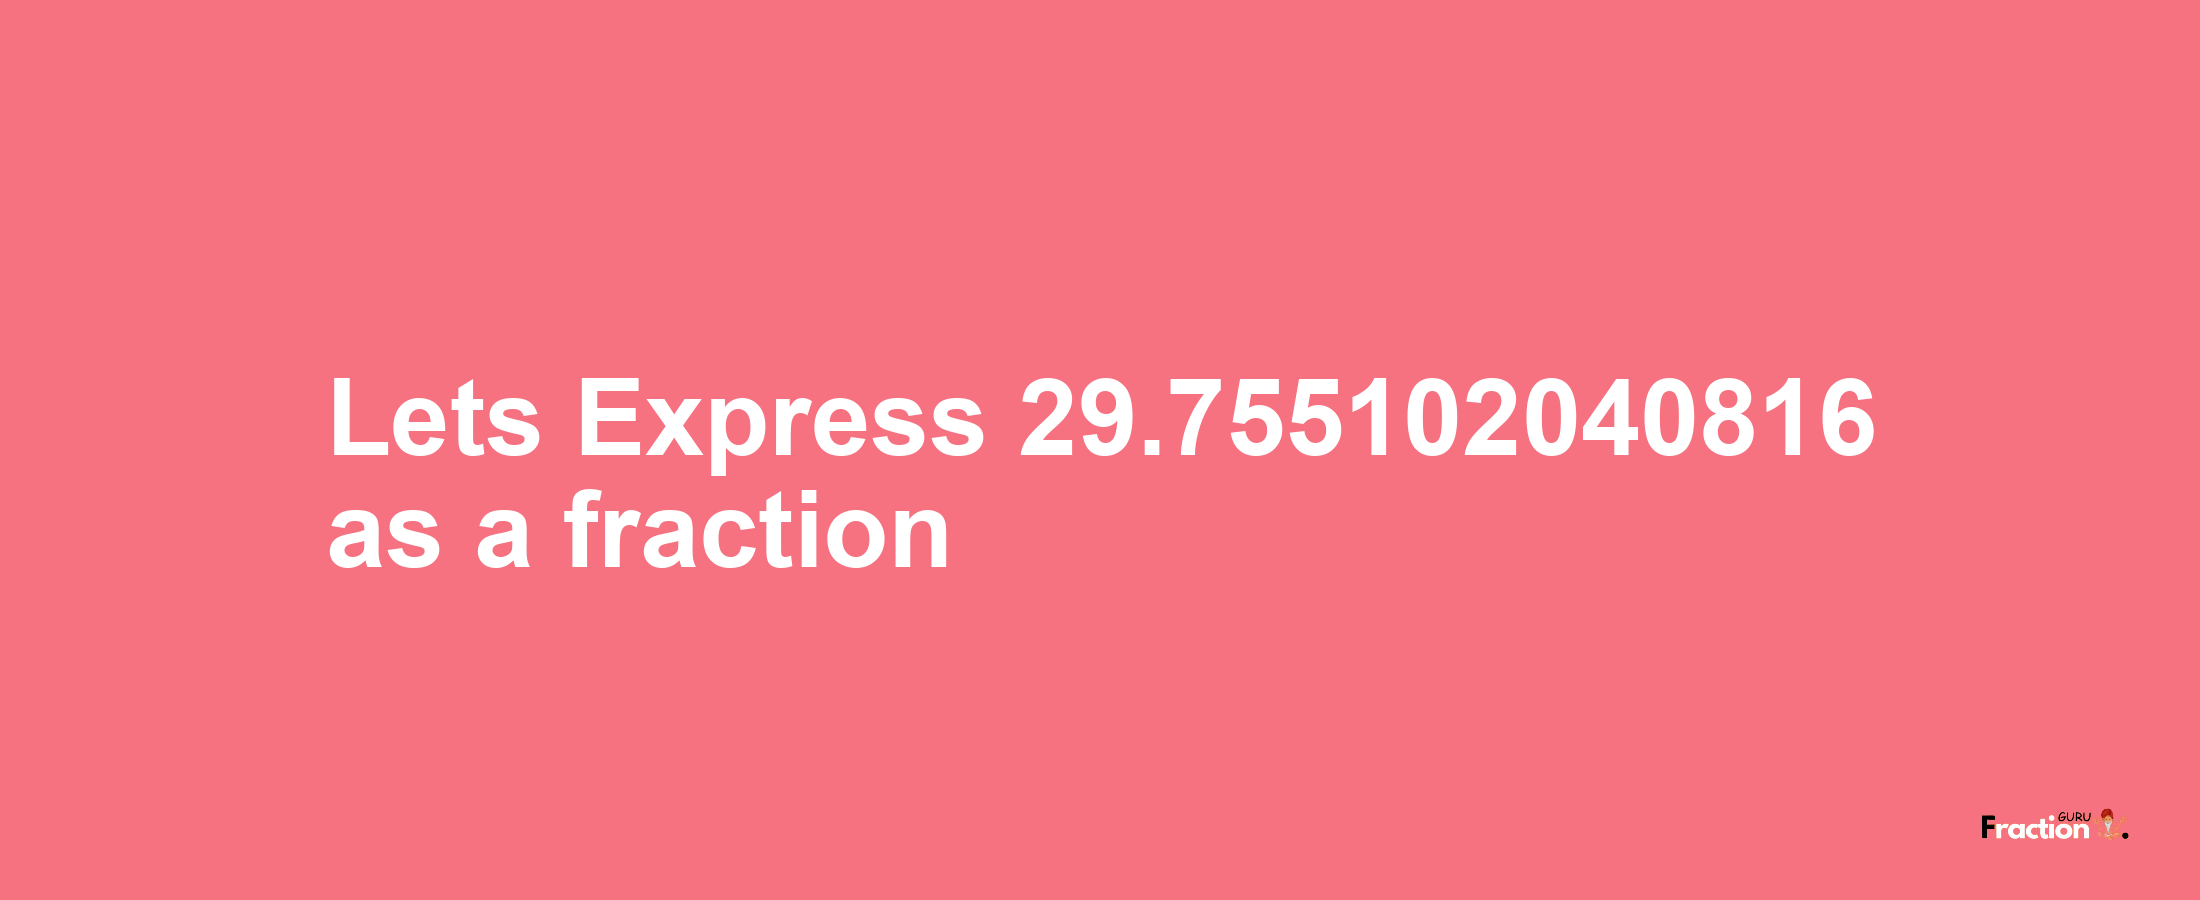 Lets Express 29.755102040816 as afraction